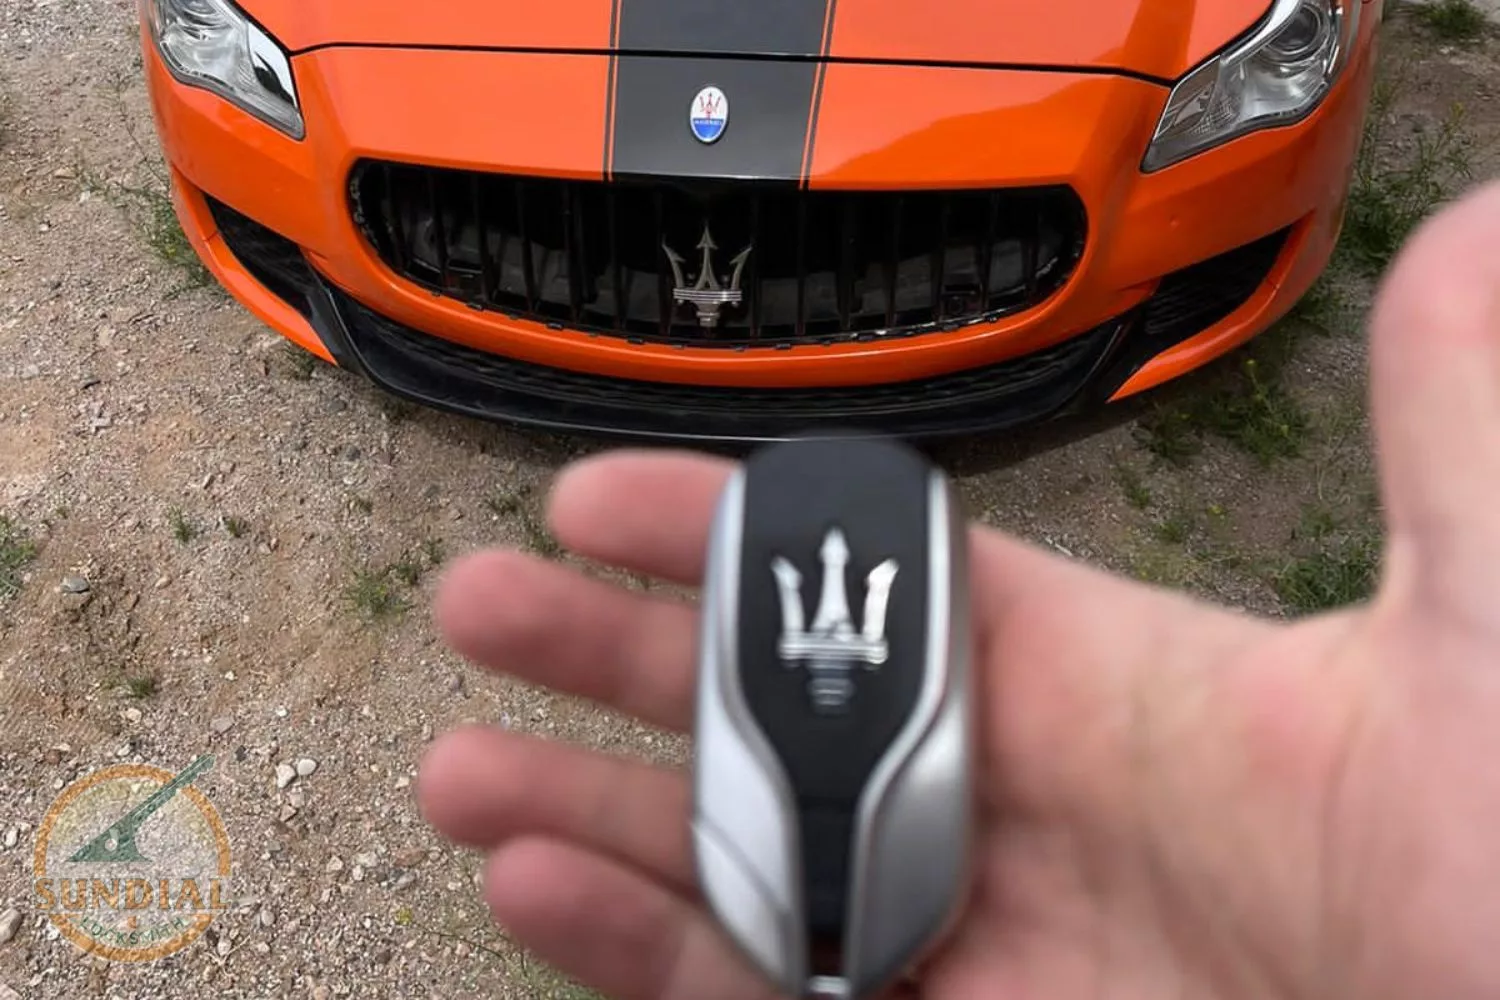 A hand holding a Maserati car key with an orange Maserati vehicle in the background.